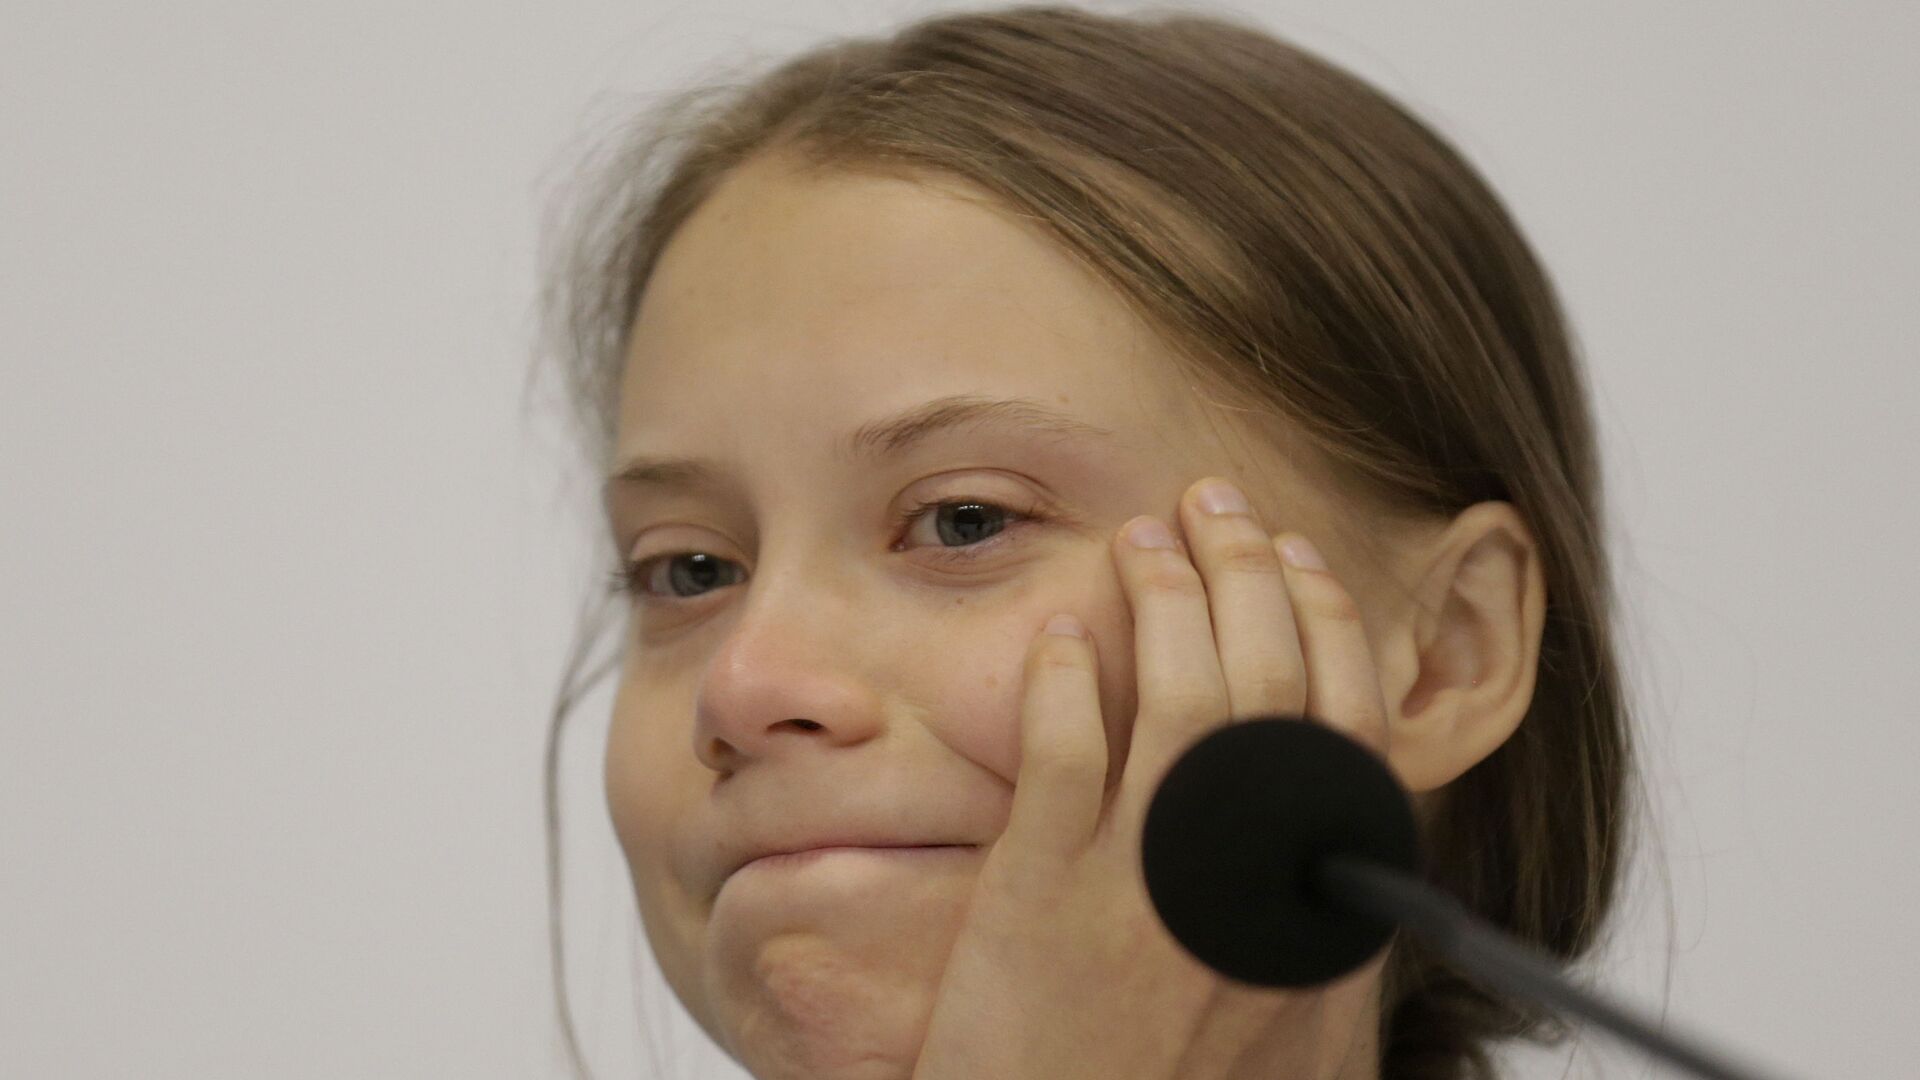 Climate activist Greta Thunberg takes part in a news conference at the COP25 climate summit in Madrid, Spain, Monday, Dec. 9, 2019. Thunberg is in Madrid where a global U.N.-sponsored climate change conference is taking place - Sputnik International, 1920, 31.10.2021